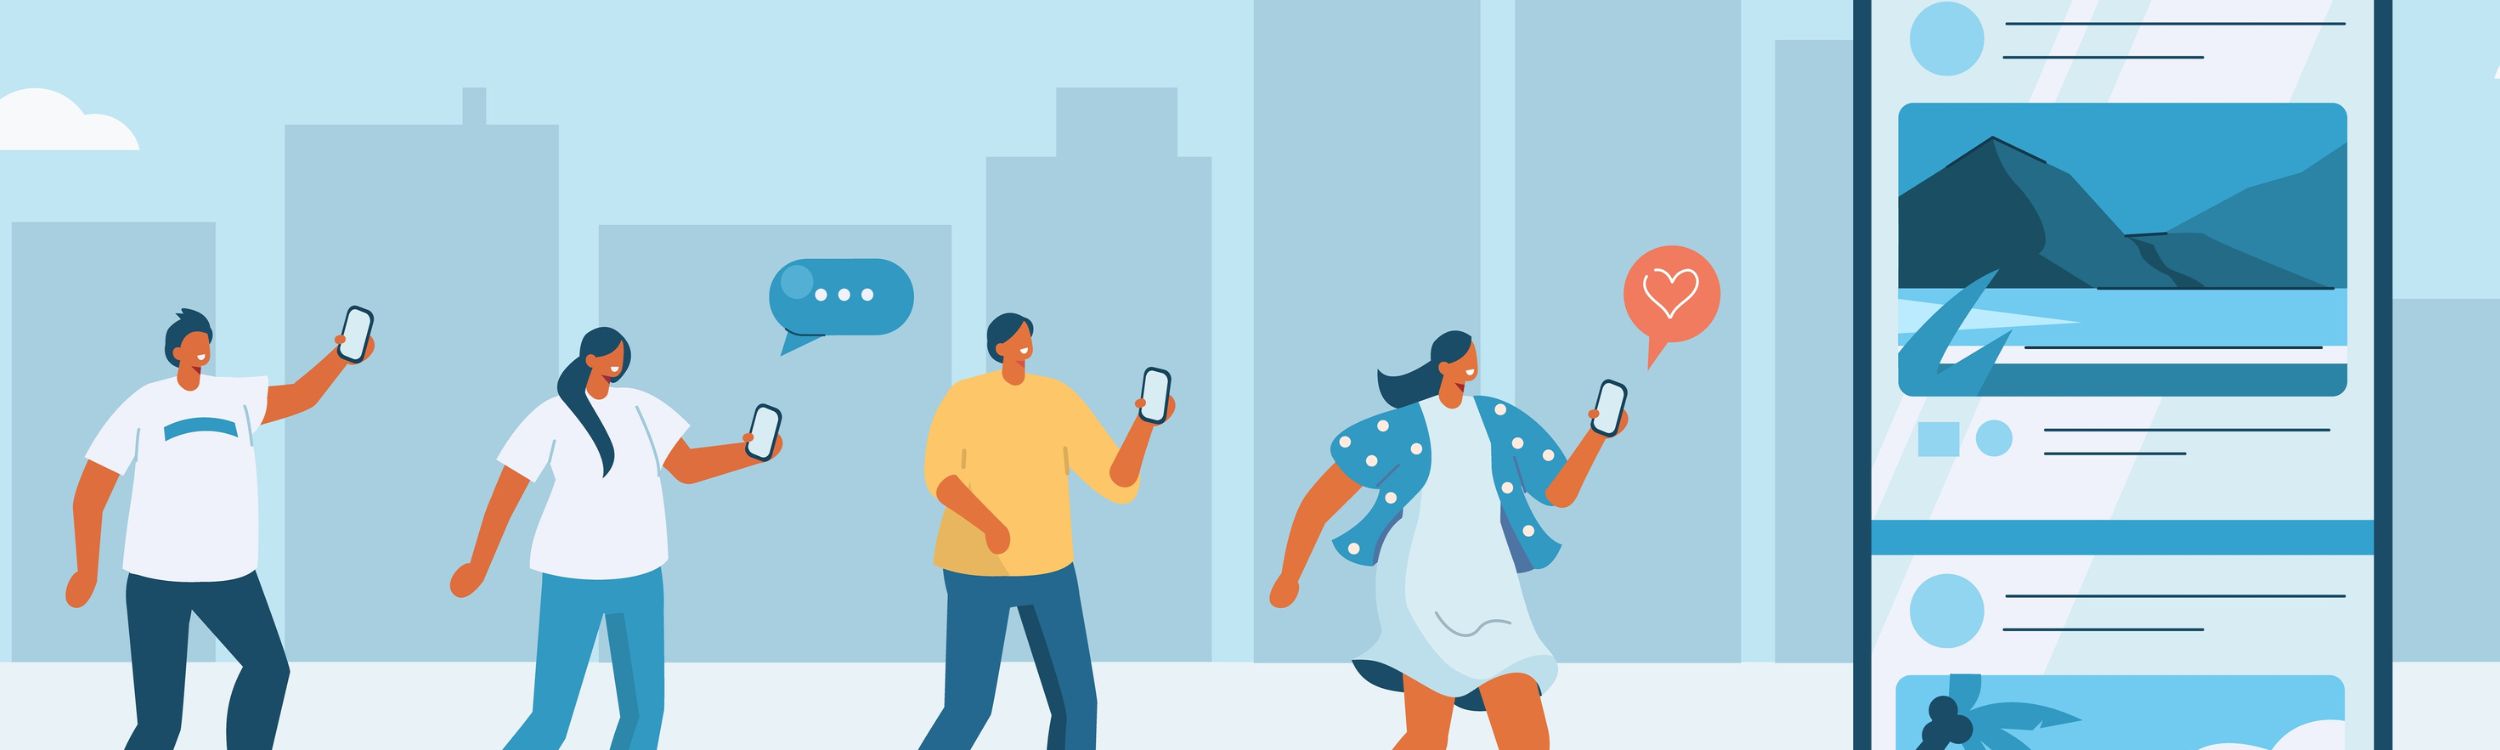 an illustration of multiple people with smartphones looking at a giant smartphone with images on it